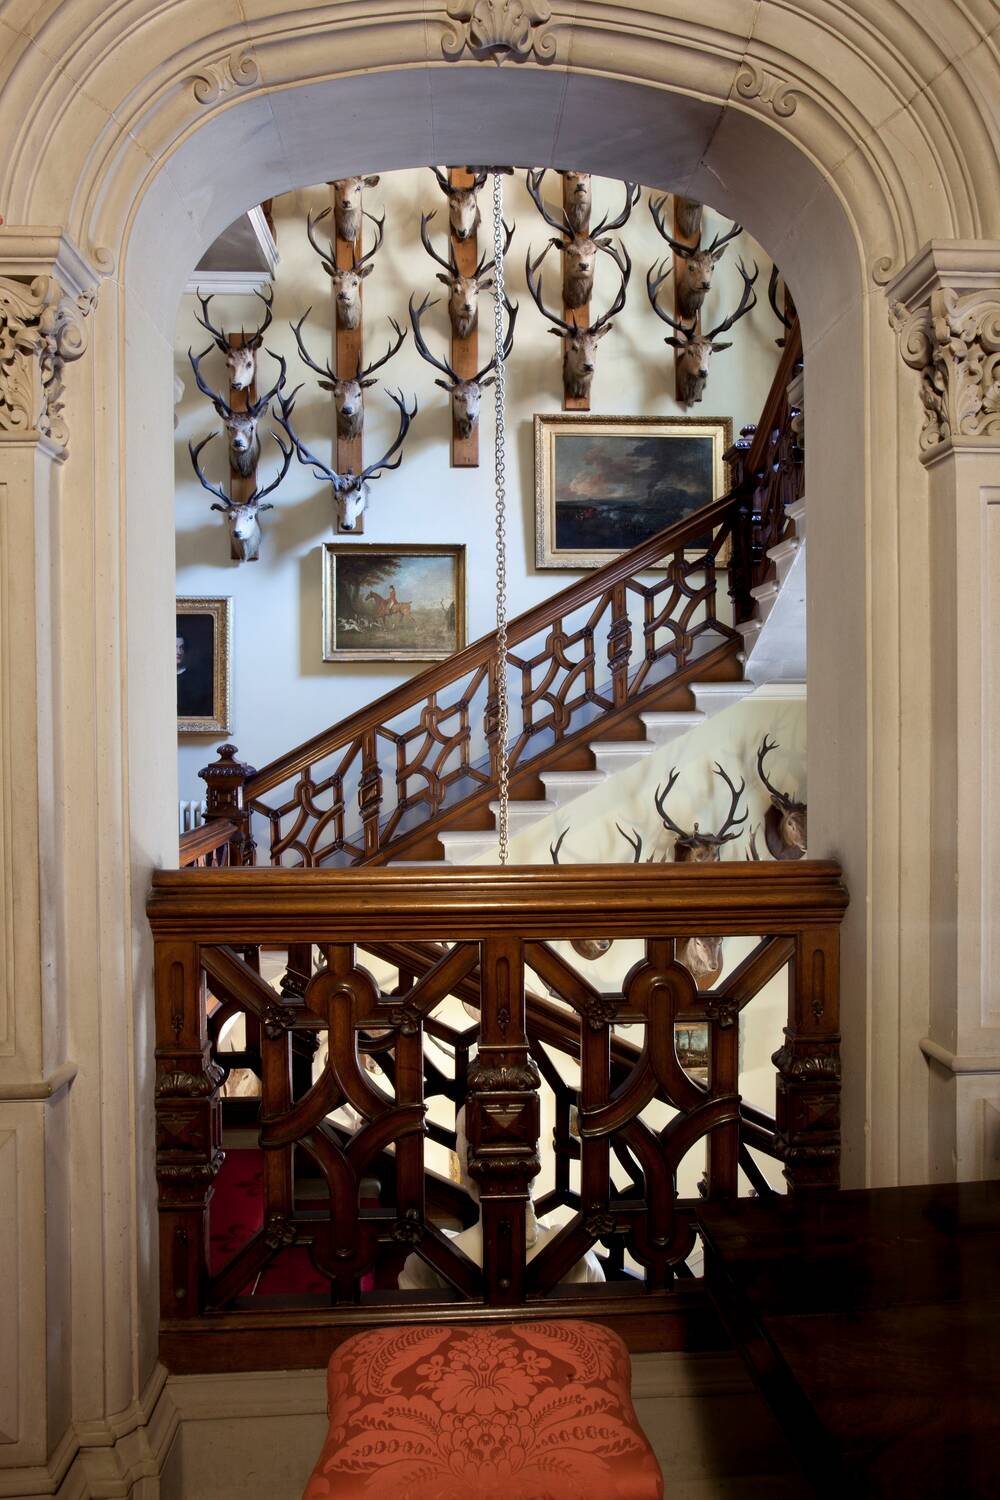 A view of a stairway from a stone arch. The walls of the staircase are covered with mounted stags’ heads, above some framed hunting scenes. The wooden bannister of the stair has a pretty, almost Celtic knot-like carving.